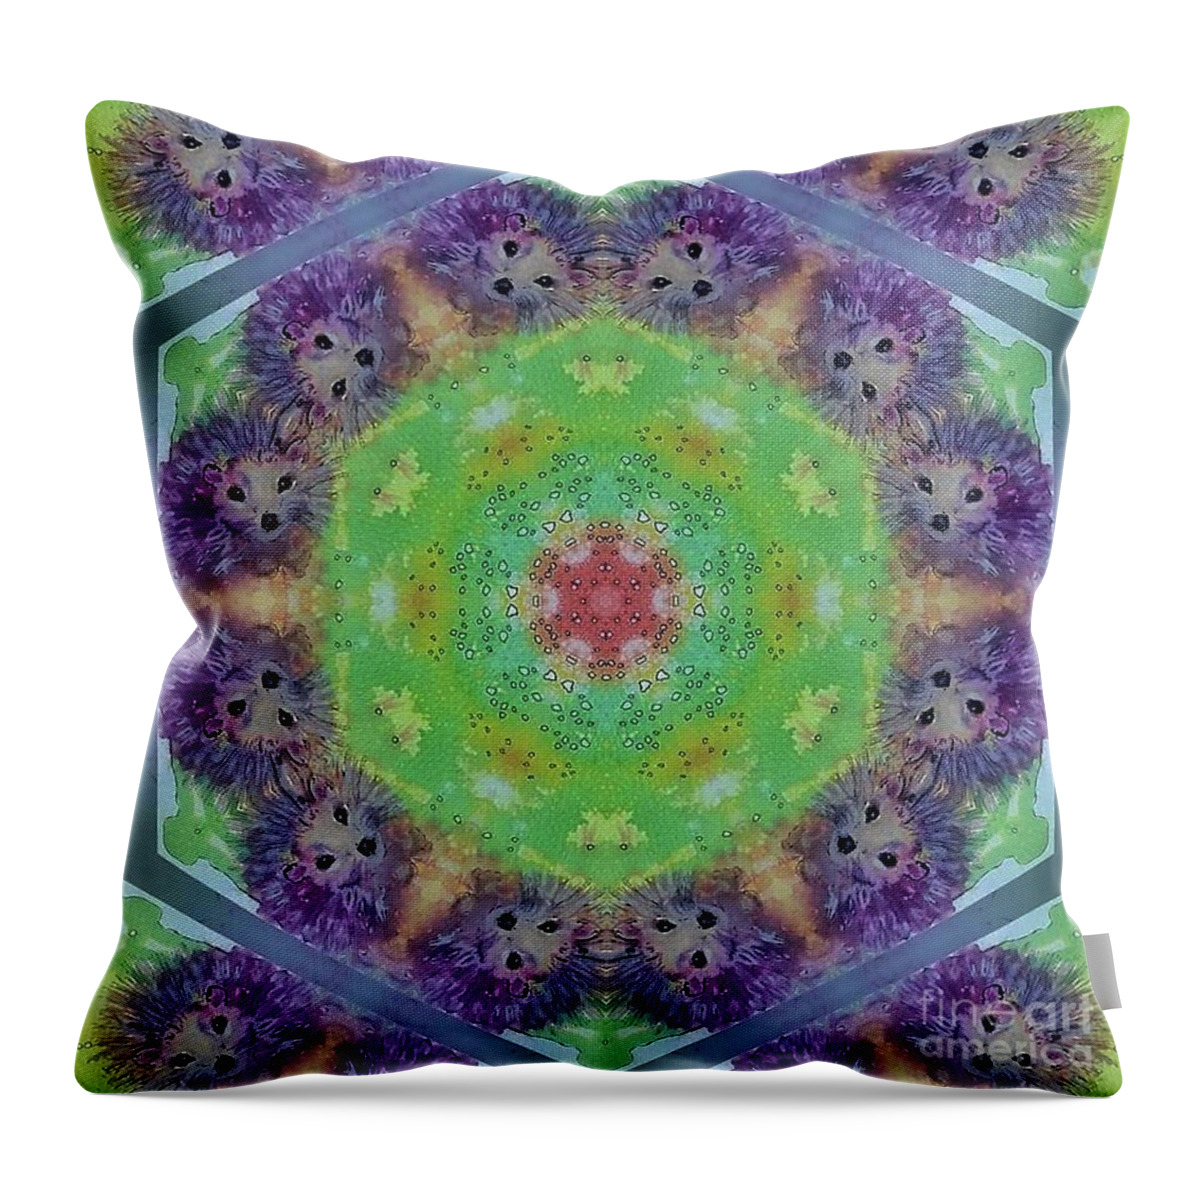 Hedgehog Throw Pillow featuring the digital art Hedgehog Love by Tracey Lee Cassin